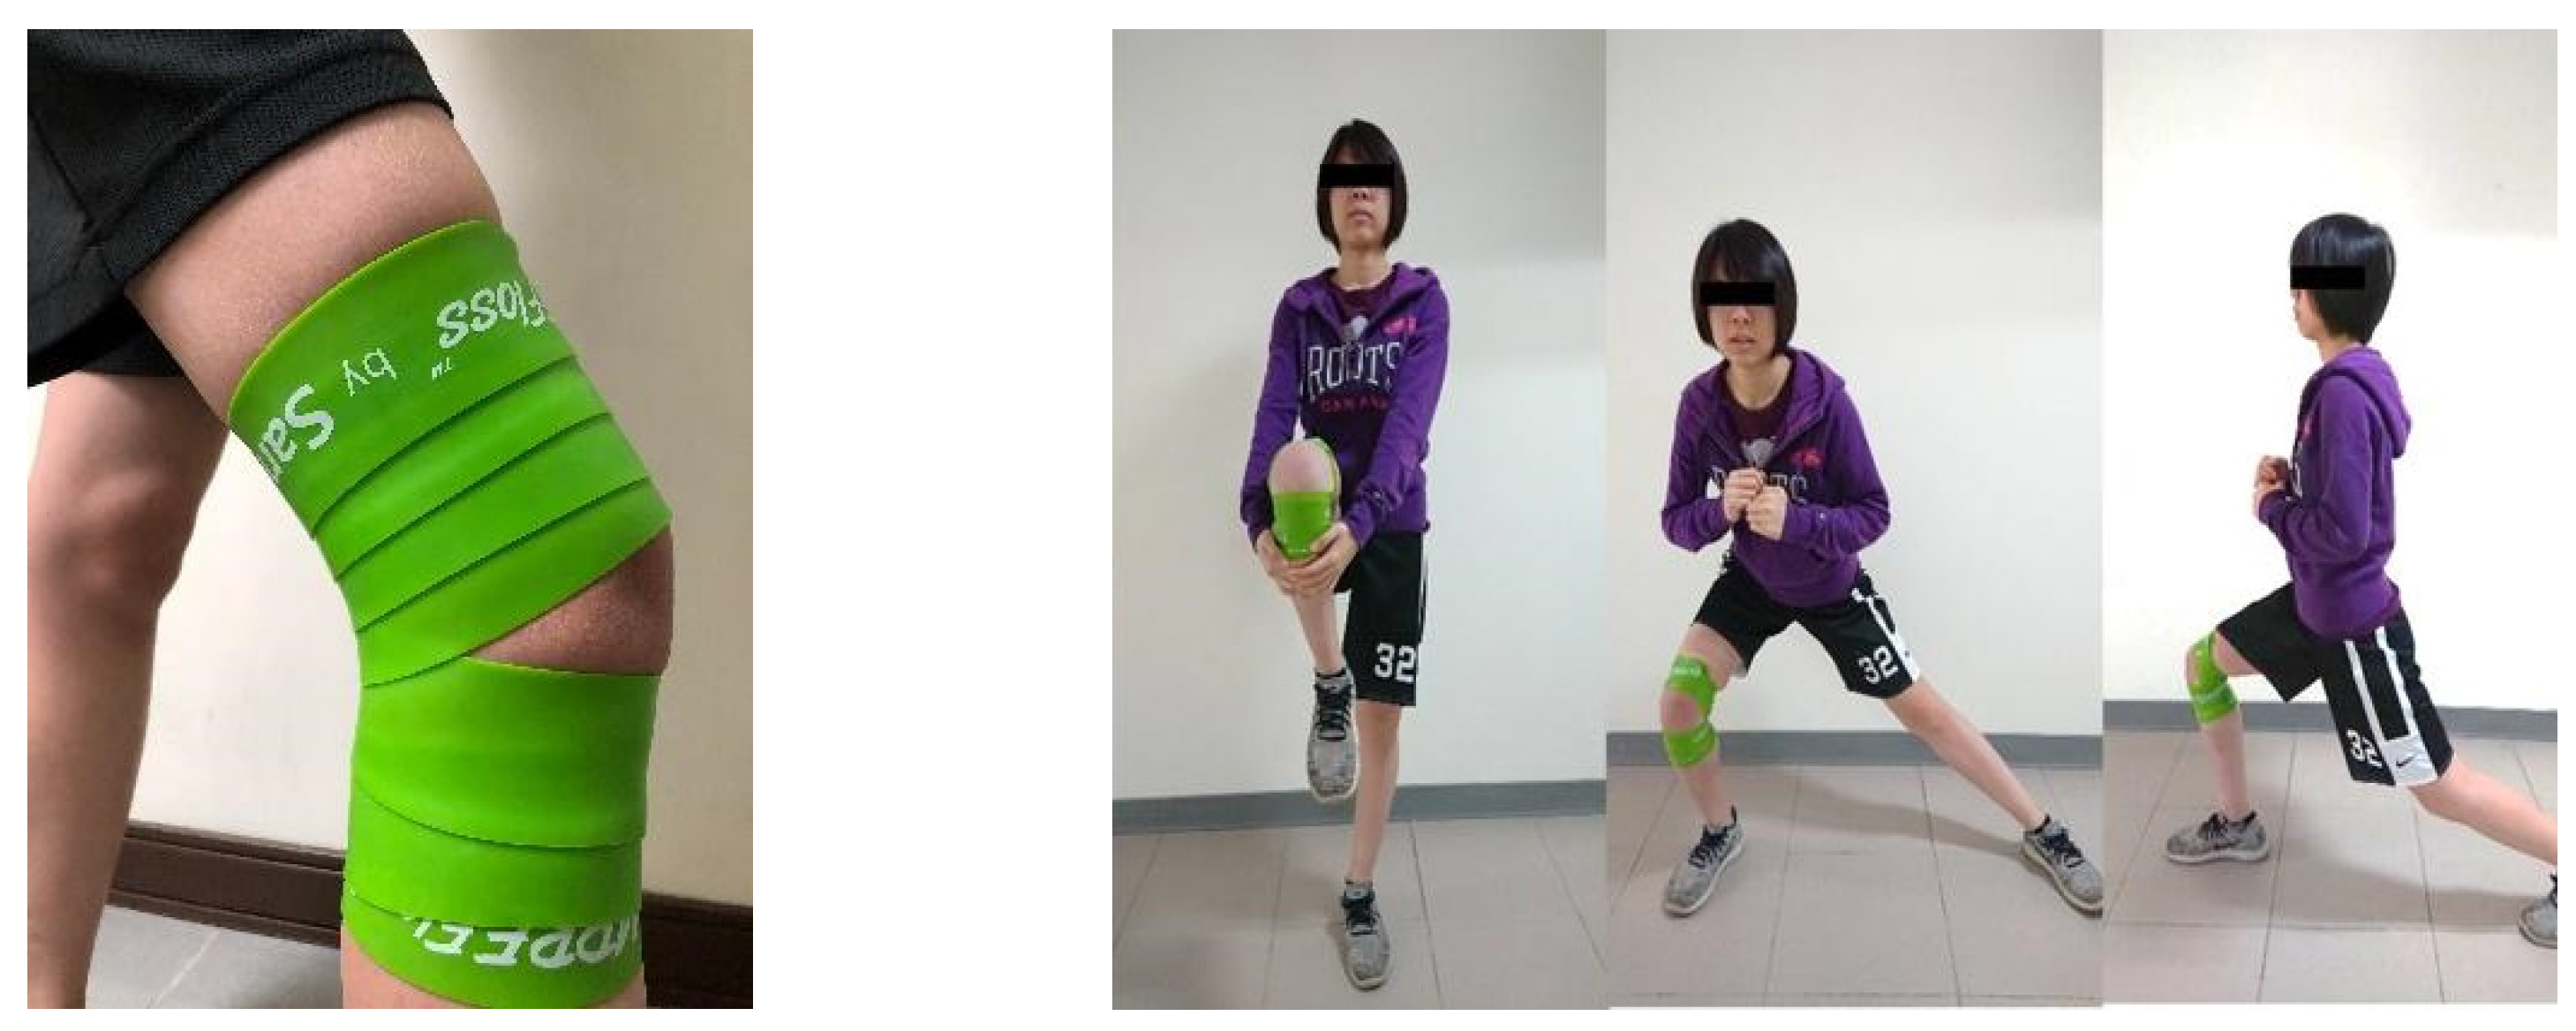 IJERPH | Free | Acute Effects of Tissue Flossing with Functional Movements on Knee Range of Motion, Static Balance, in Single-Leg Hop Distance, and Landing Stabilization Performance Female College